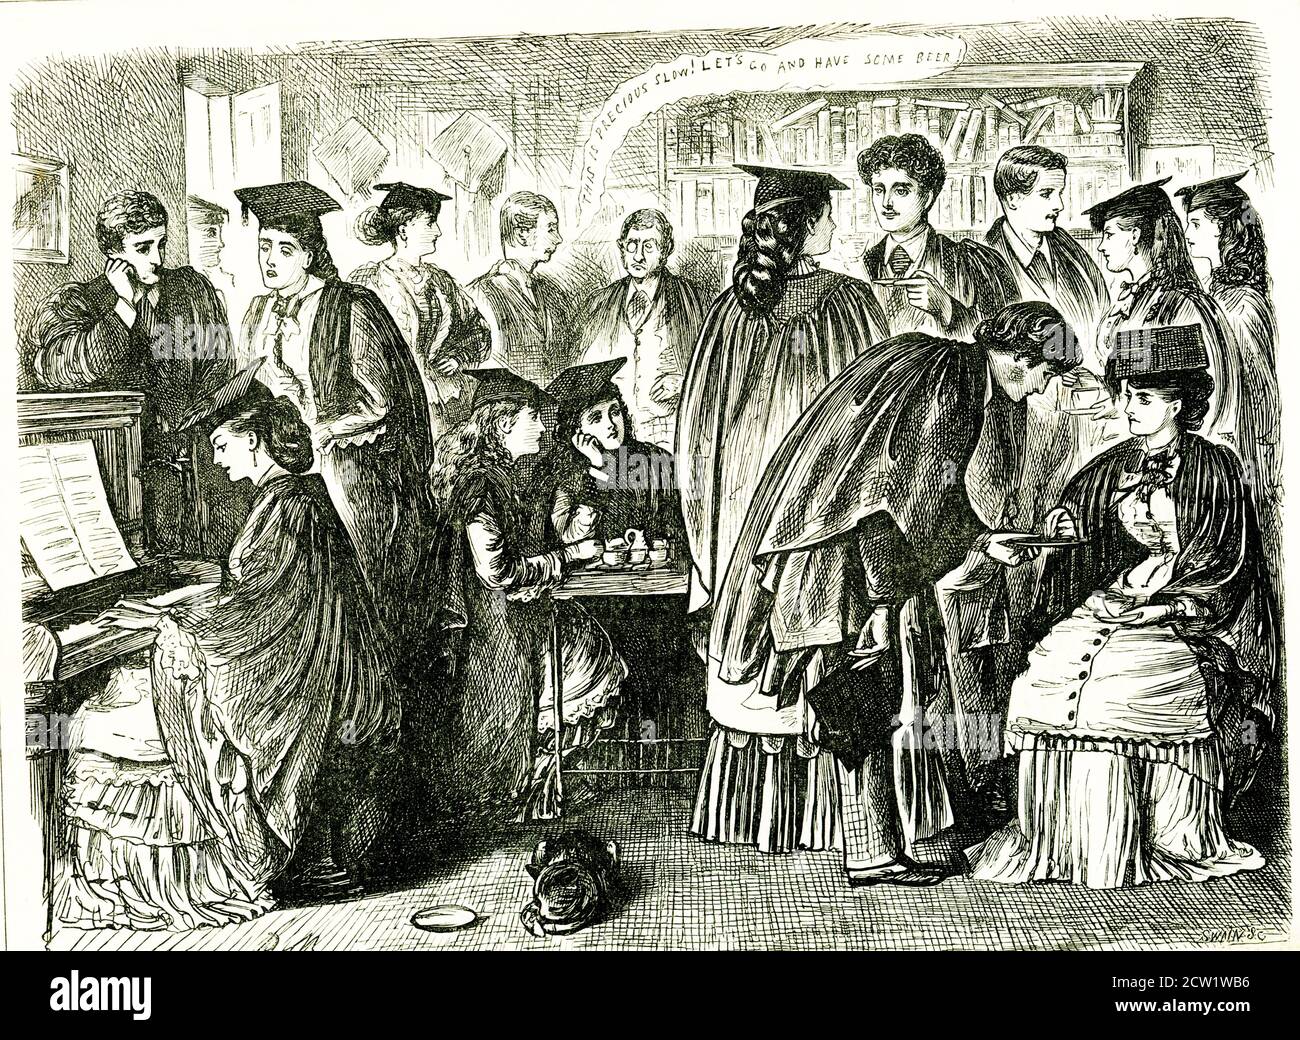 The caption for this illustration reads: Sweet-Girl Graduates Afternoon Tea versus Wine. The man in the background is saying: “This is precious slow! Let’s go and have some beer!” It is taken from the Punch Almanac for 1873. Punch, or The London Charivari, was a British weekly magazine of humor and satire established in 1841 by Henry Mayhew and wood-engraver Ebenezer Landells. Historically, it was most influential in the 1840s and 1850s, when it helped to coin the term 'cartoon' in its modern sense as a humorous illustration. Stock Photo